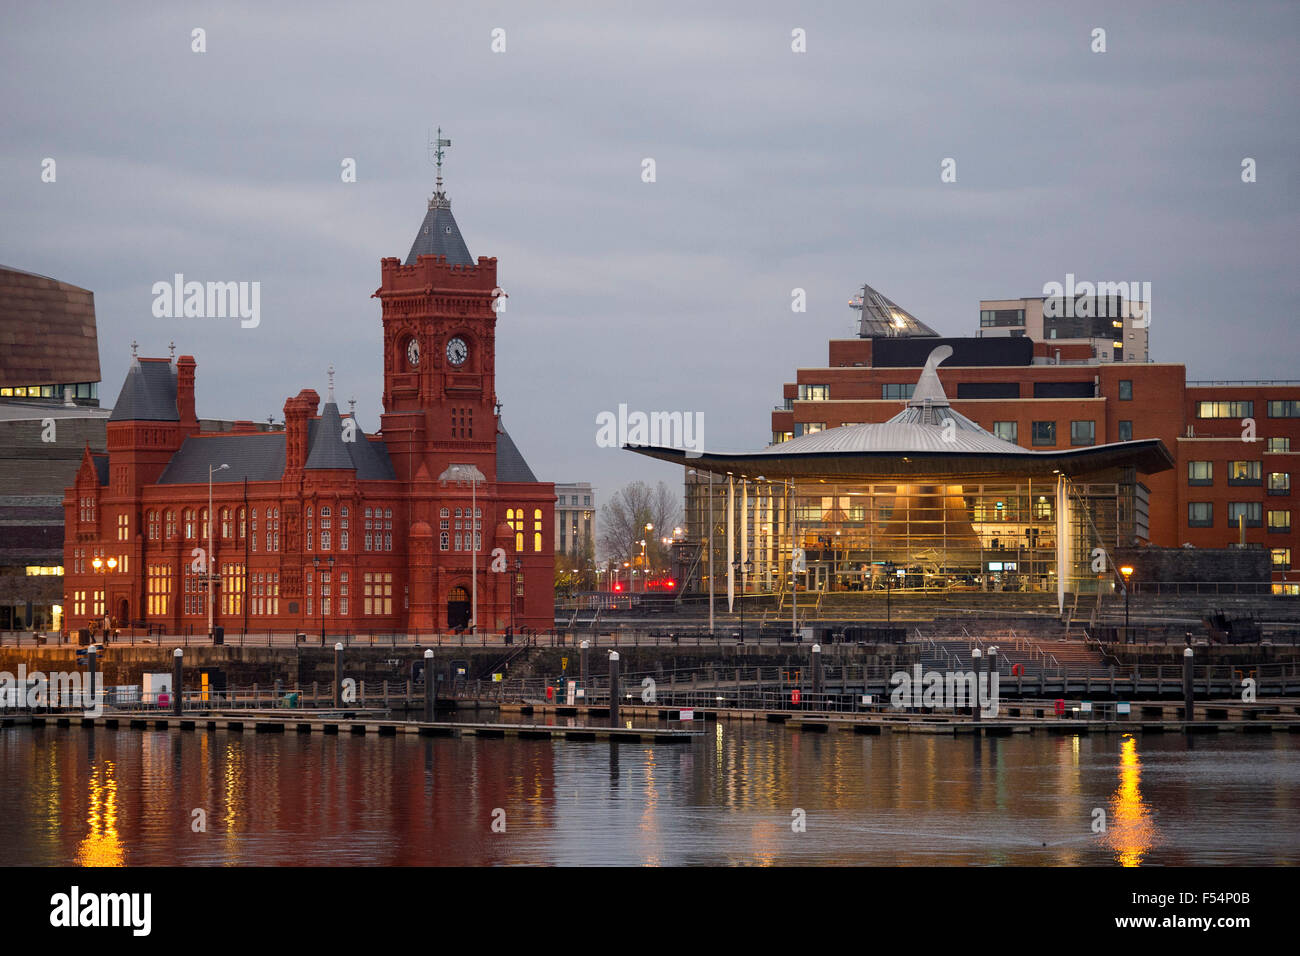 Die Senedd (National Assembly Building) in Cardiff Bay, South Wales, in der Nacht. Stockfoto